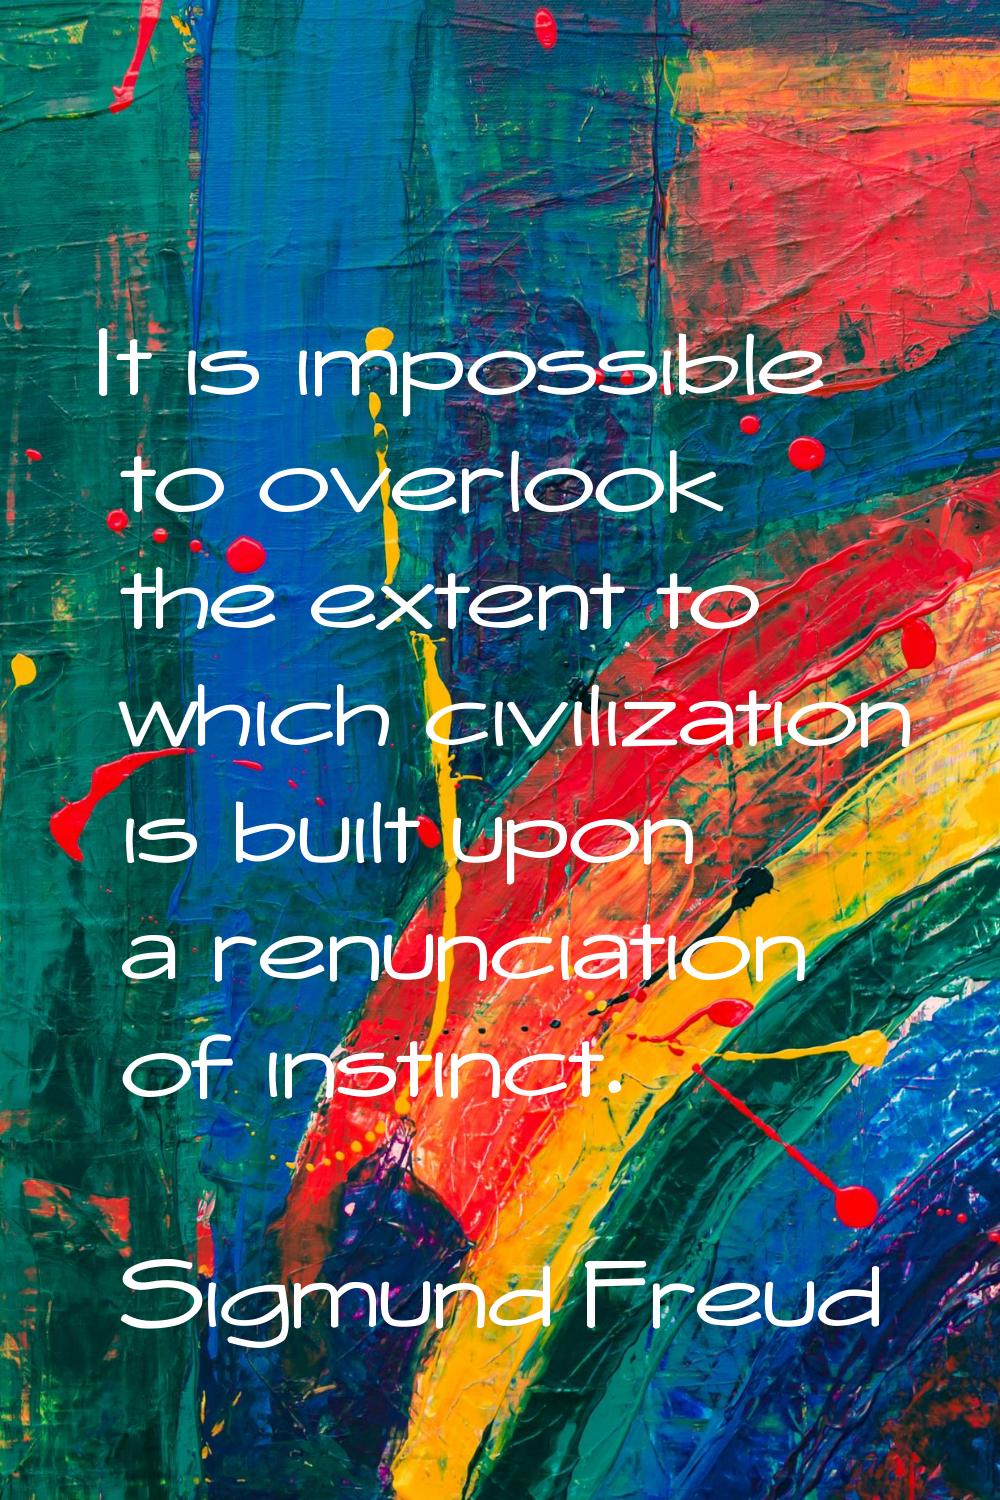 It is impossible to overlook the extent to which civilization is built upon a renunciation of insti